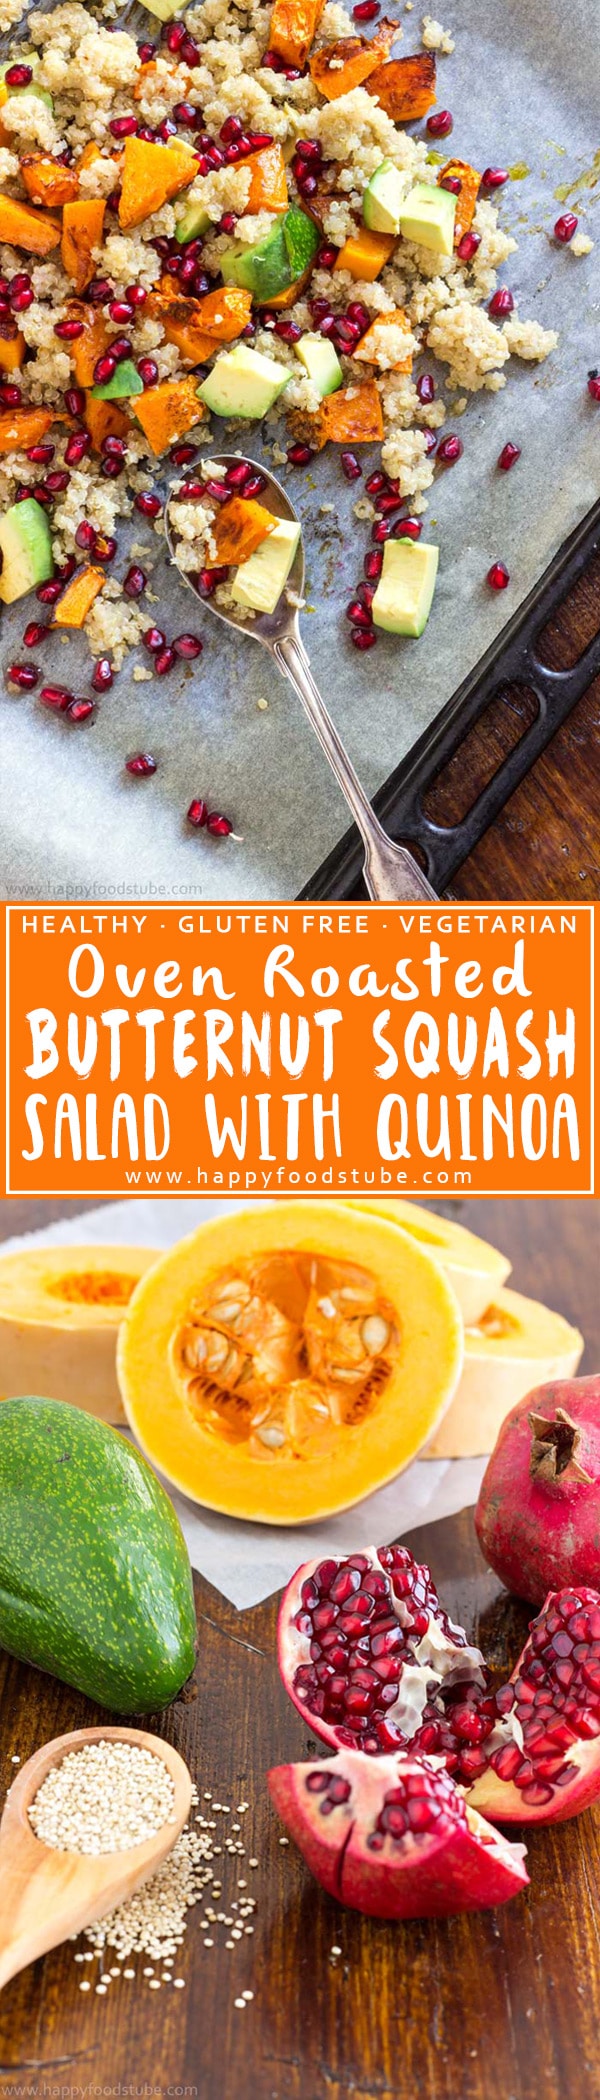 Healthy Roasted Butternut Squash Salad with Quinoa and Pomegranate. Only 5 ingredients and ready in 30 minutes. Gluten free & vegetarian recipe! | happyfoodstube.com